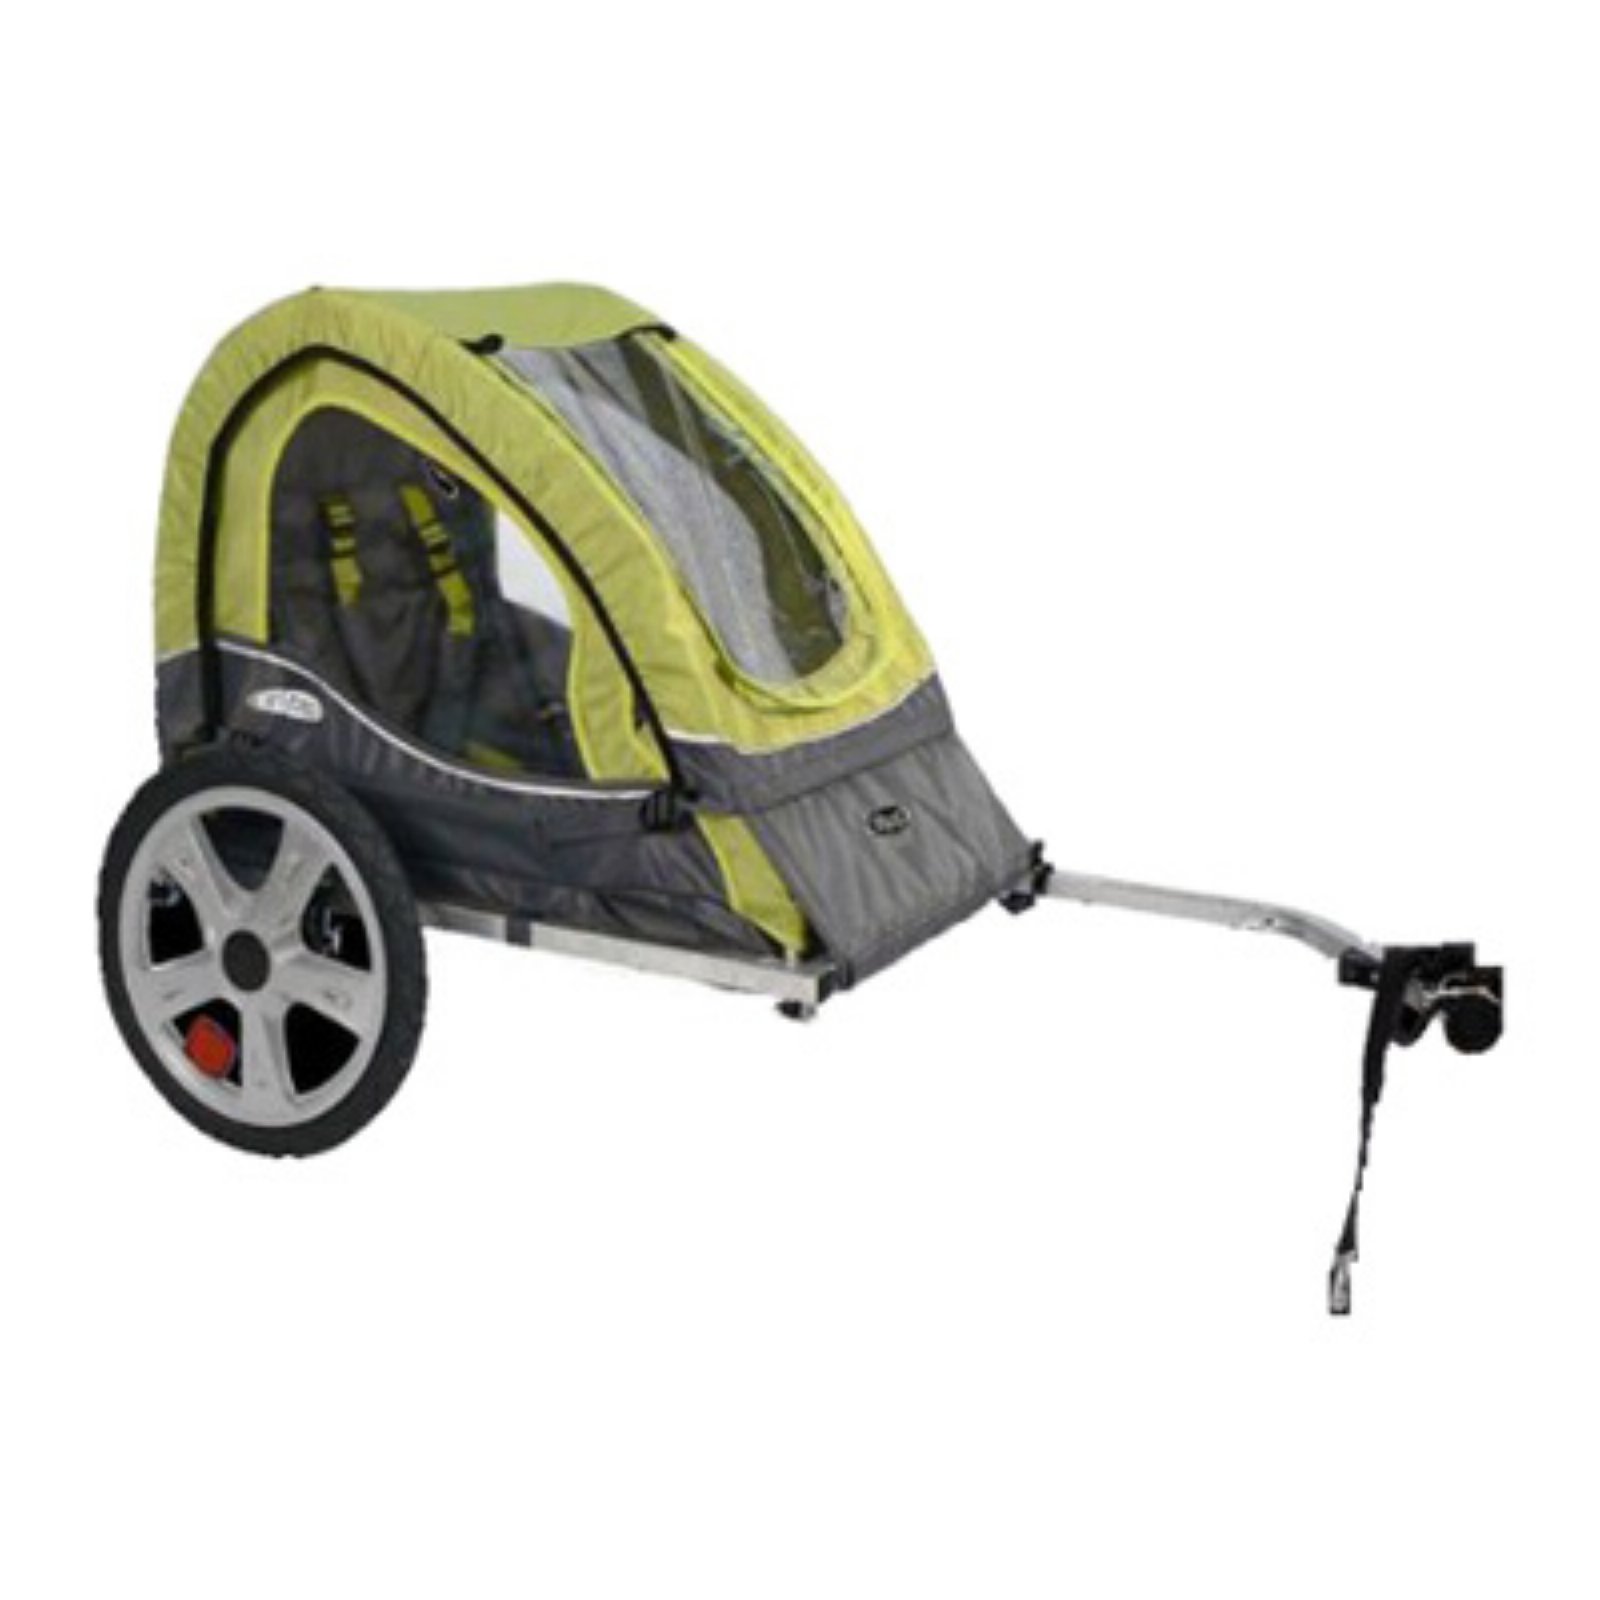 InStep Sync Single Trailer Bicycle-Color:GREEN/GRAY,Style:Child Trailer - image 1 of 3